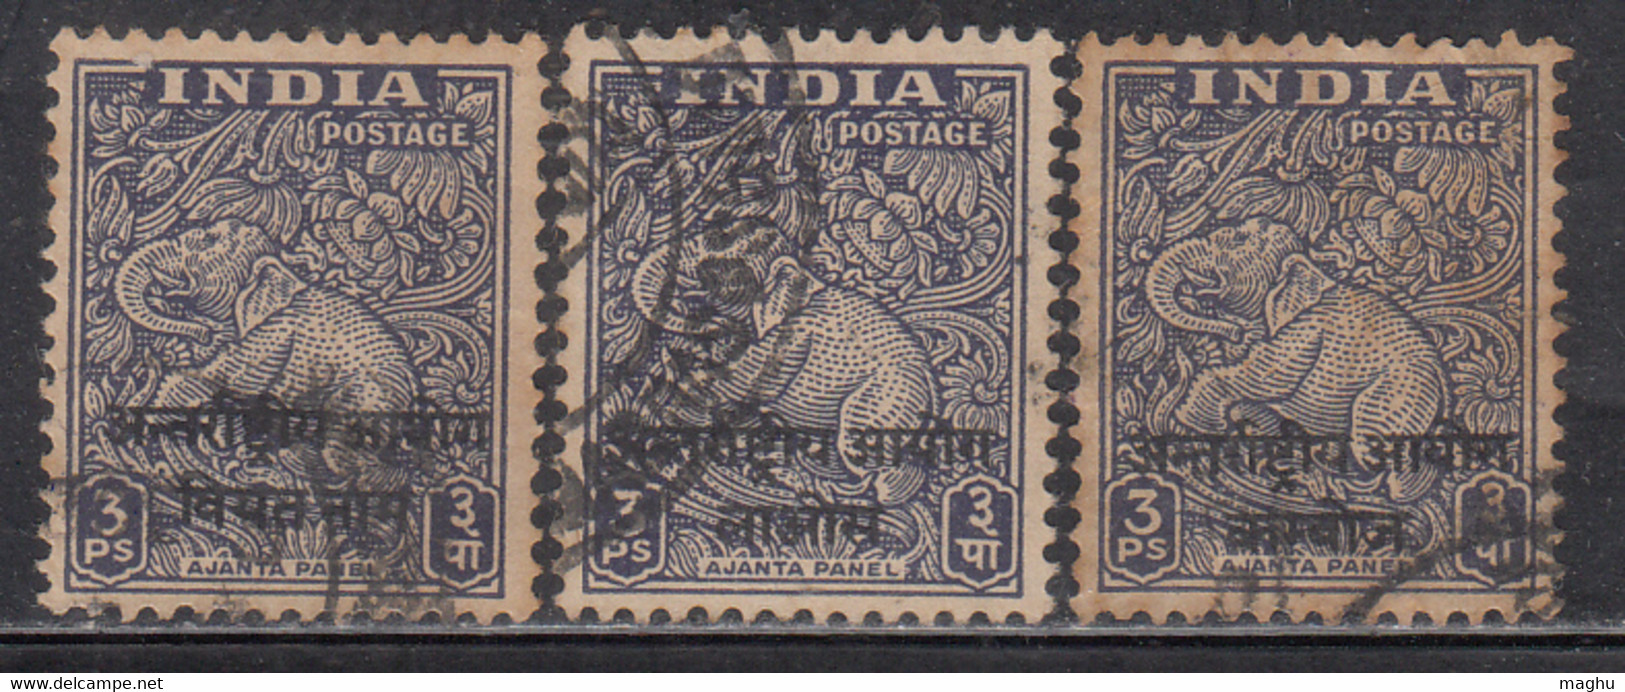 3p X 3, Vietnam, Cambodia, Laos, India Used Ovpt, Archeological Series, Military, Elephant, 1954 Indo- China - Militaire Vrijstelling Van Portkosten